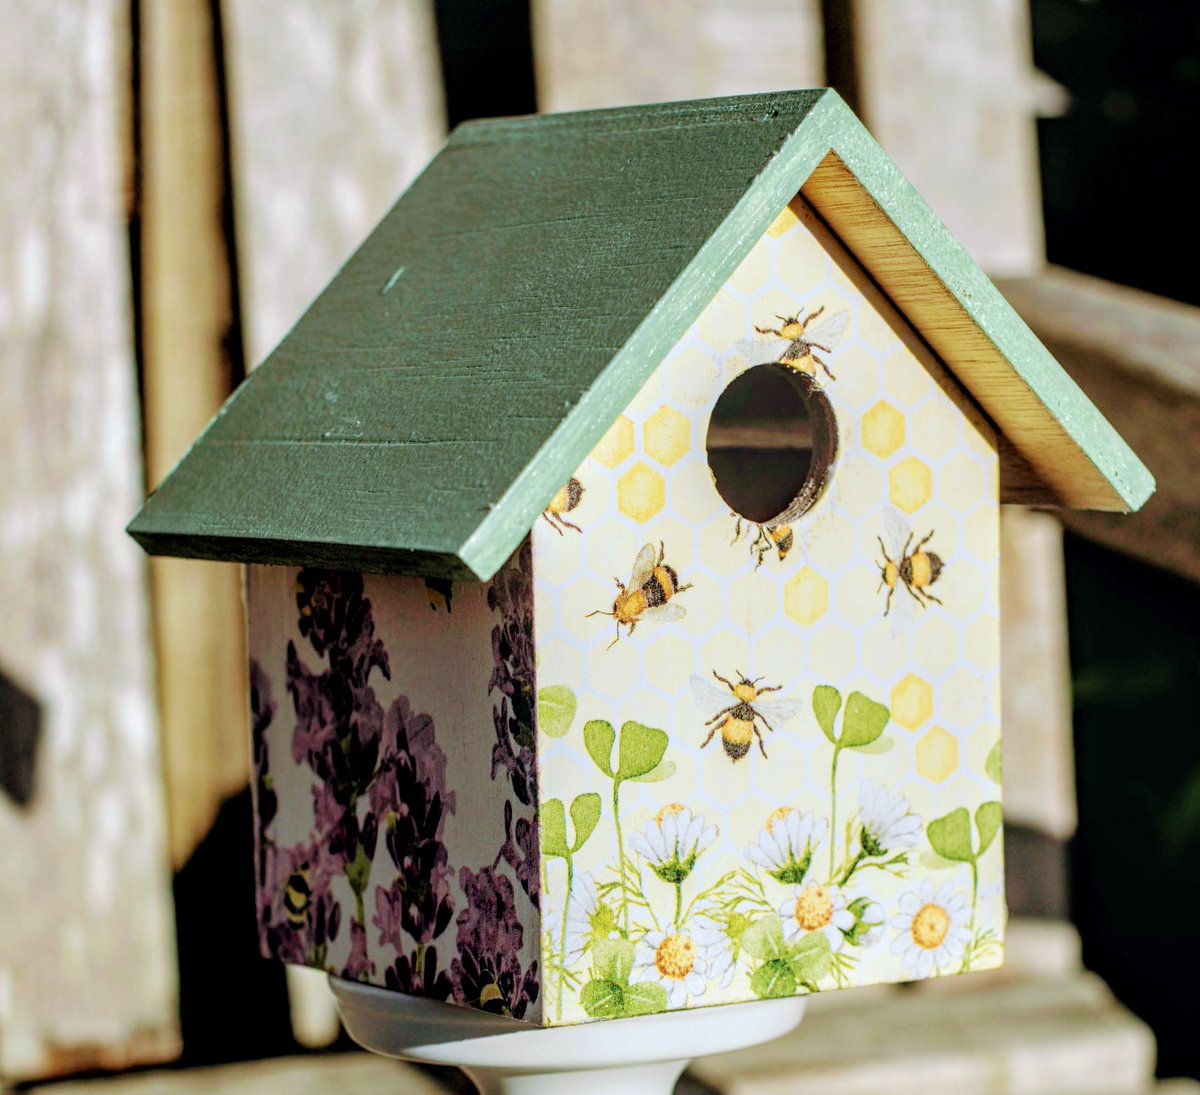 #NationalNestboxWeek begins on Valentine's Day when birds are reputed to start courting. 
Made from marine wood. Has removable roof.
#MothersDay
#birdwatching
#MHHSBD 
#Craftbizparty
#creativebizhour
#yourbizhour
#womaninbizhour
shorturl.at/fjlsG